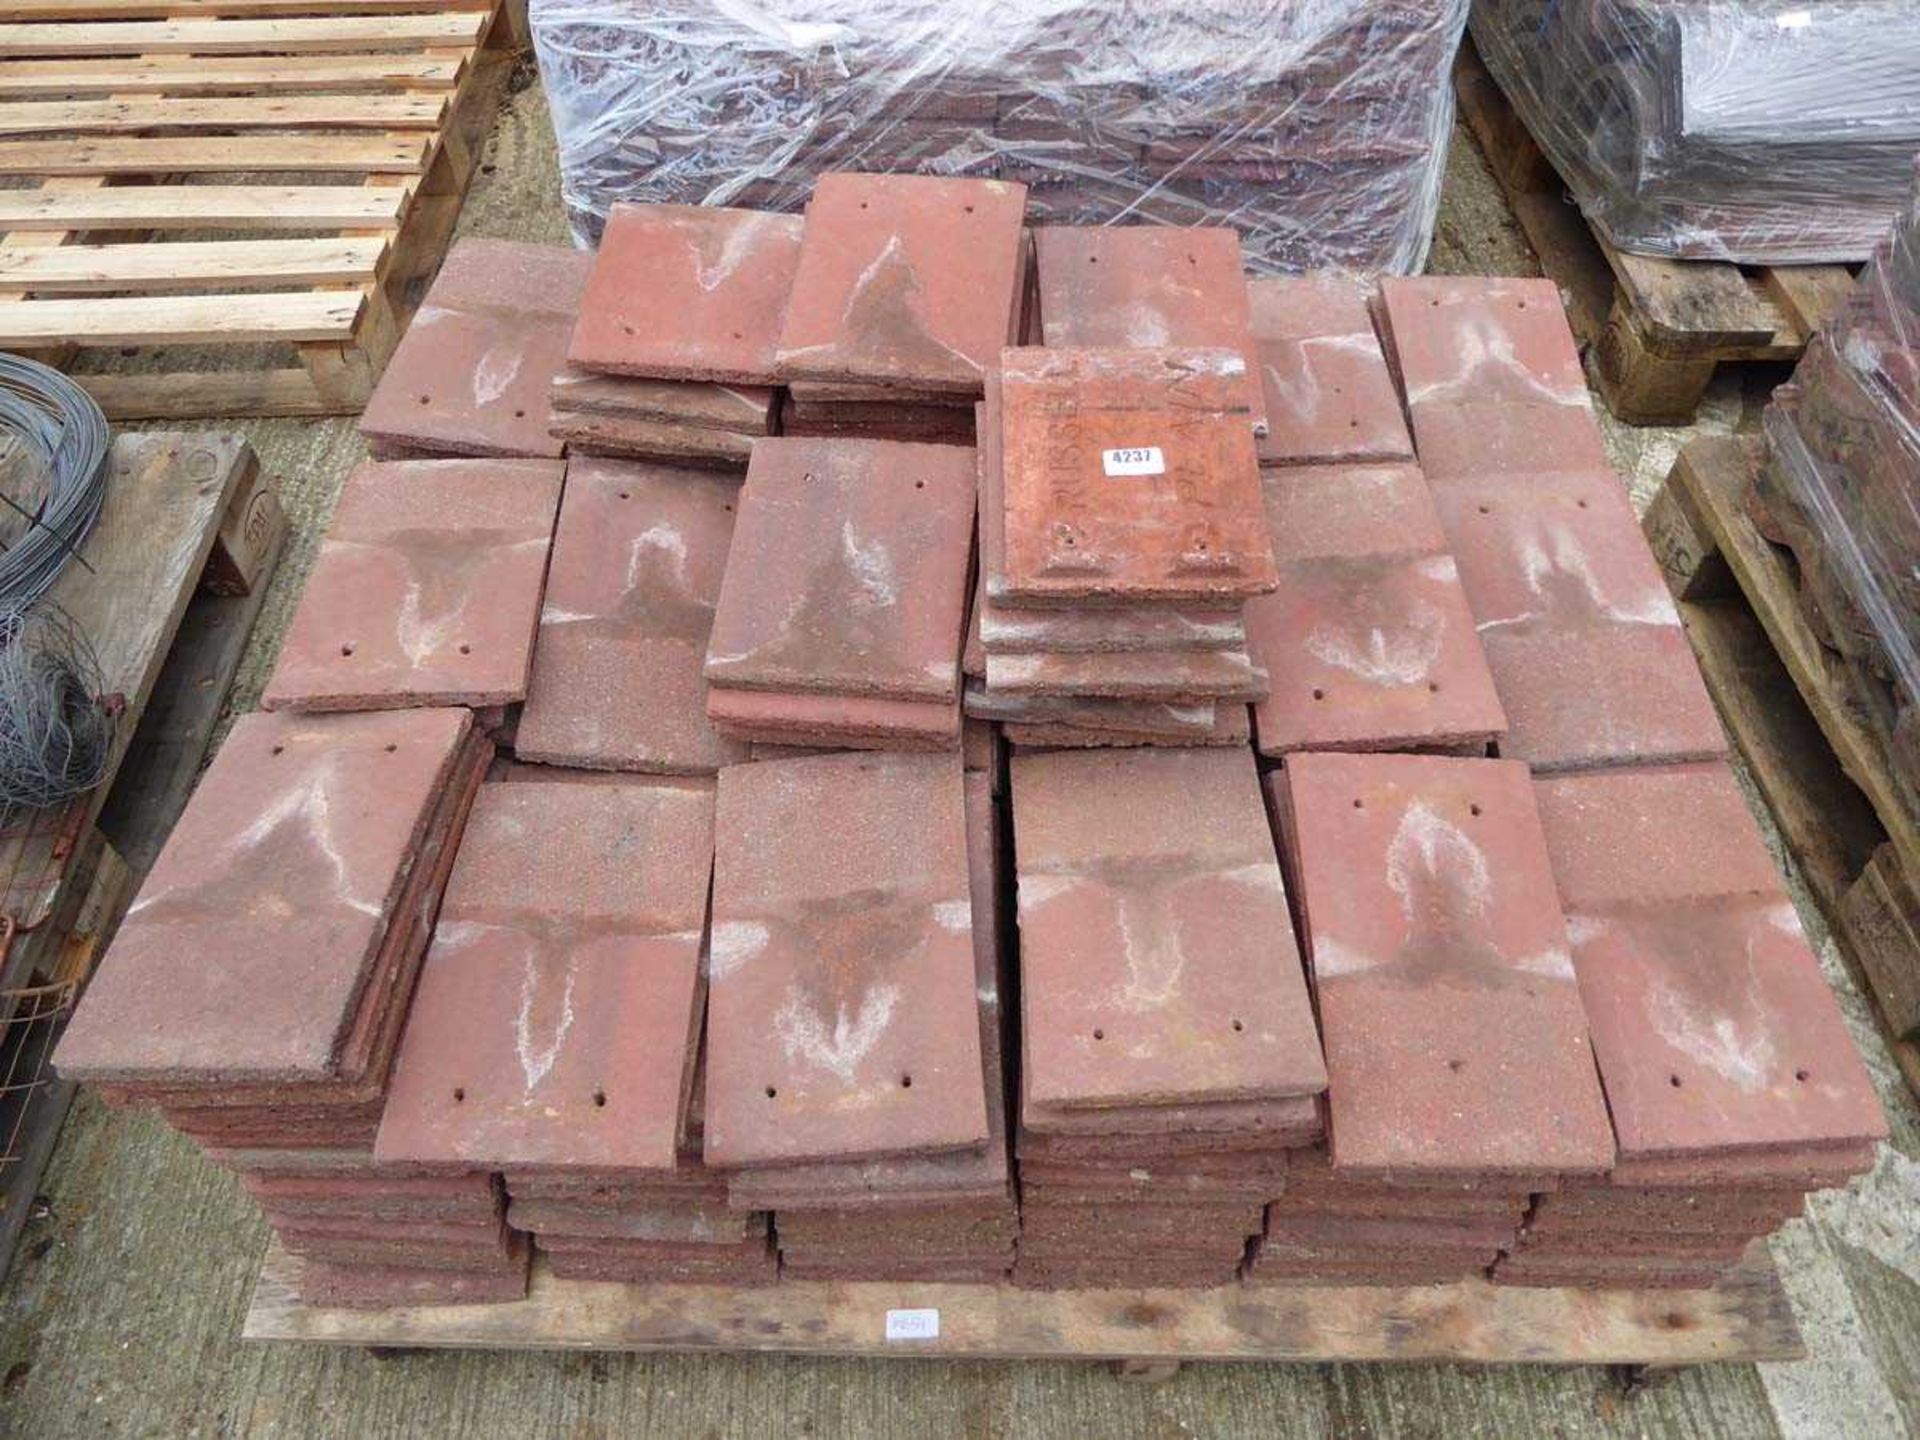 2 pallets of terracotta roofing tiles